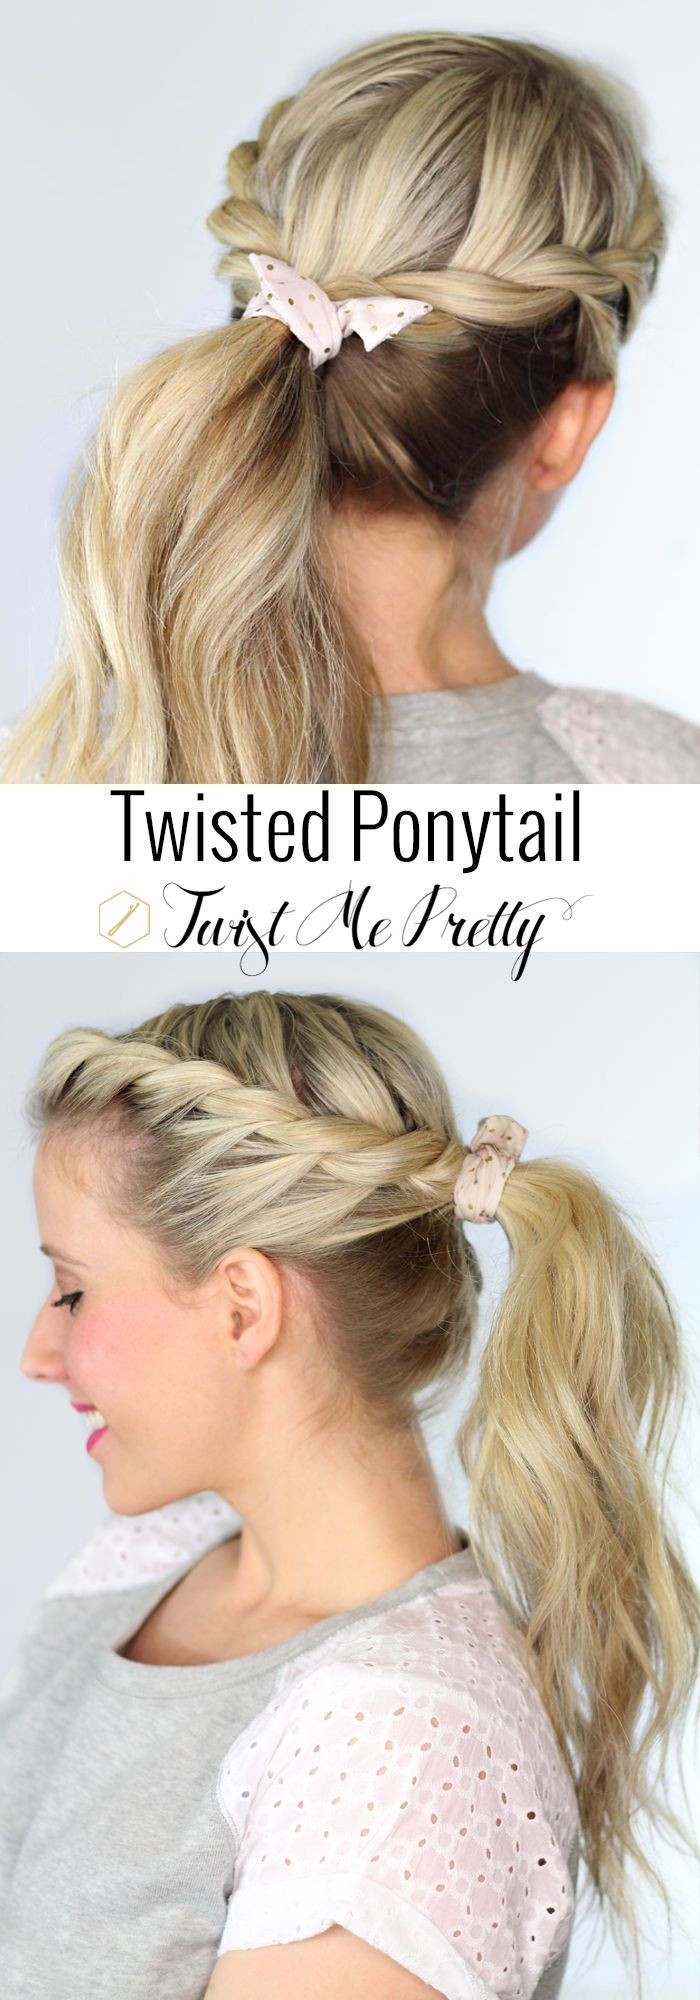 Twisted Ponytail Hairstyle for Spring